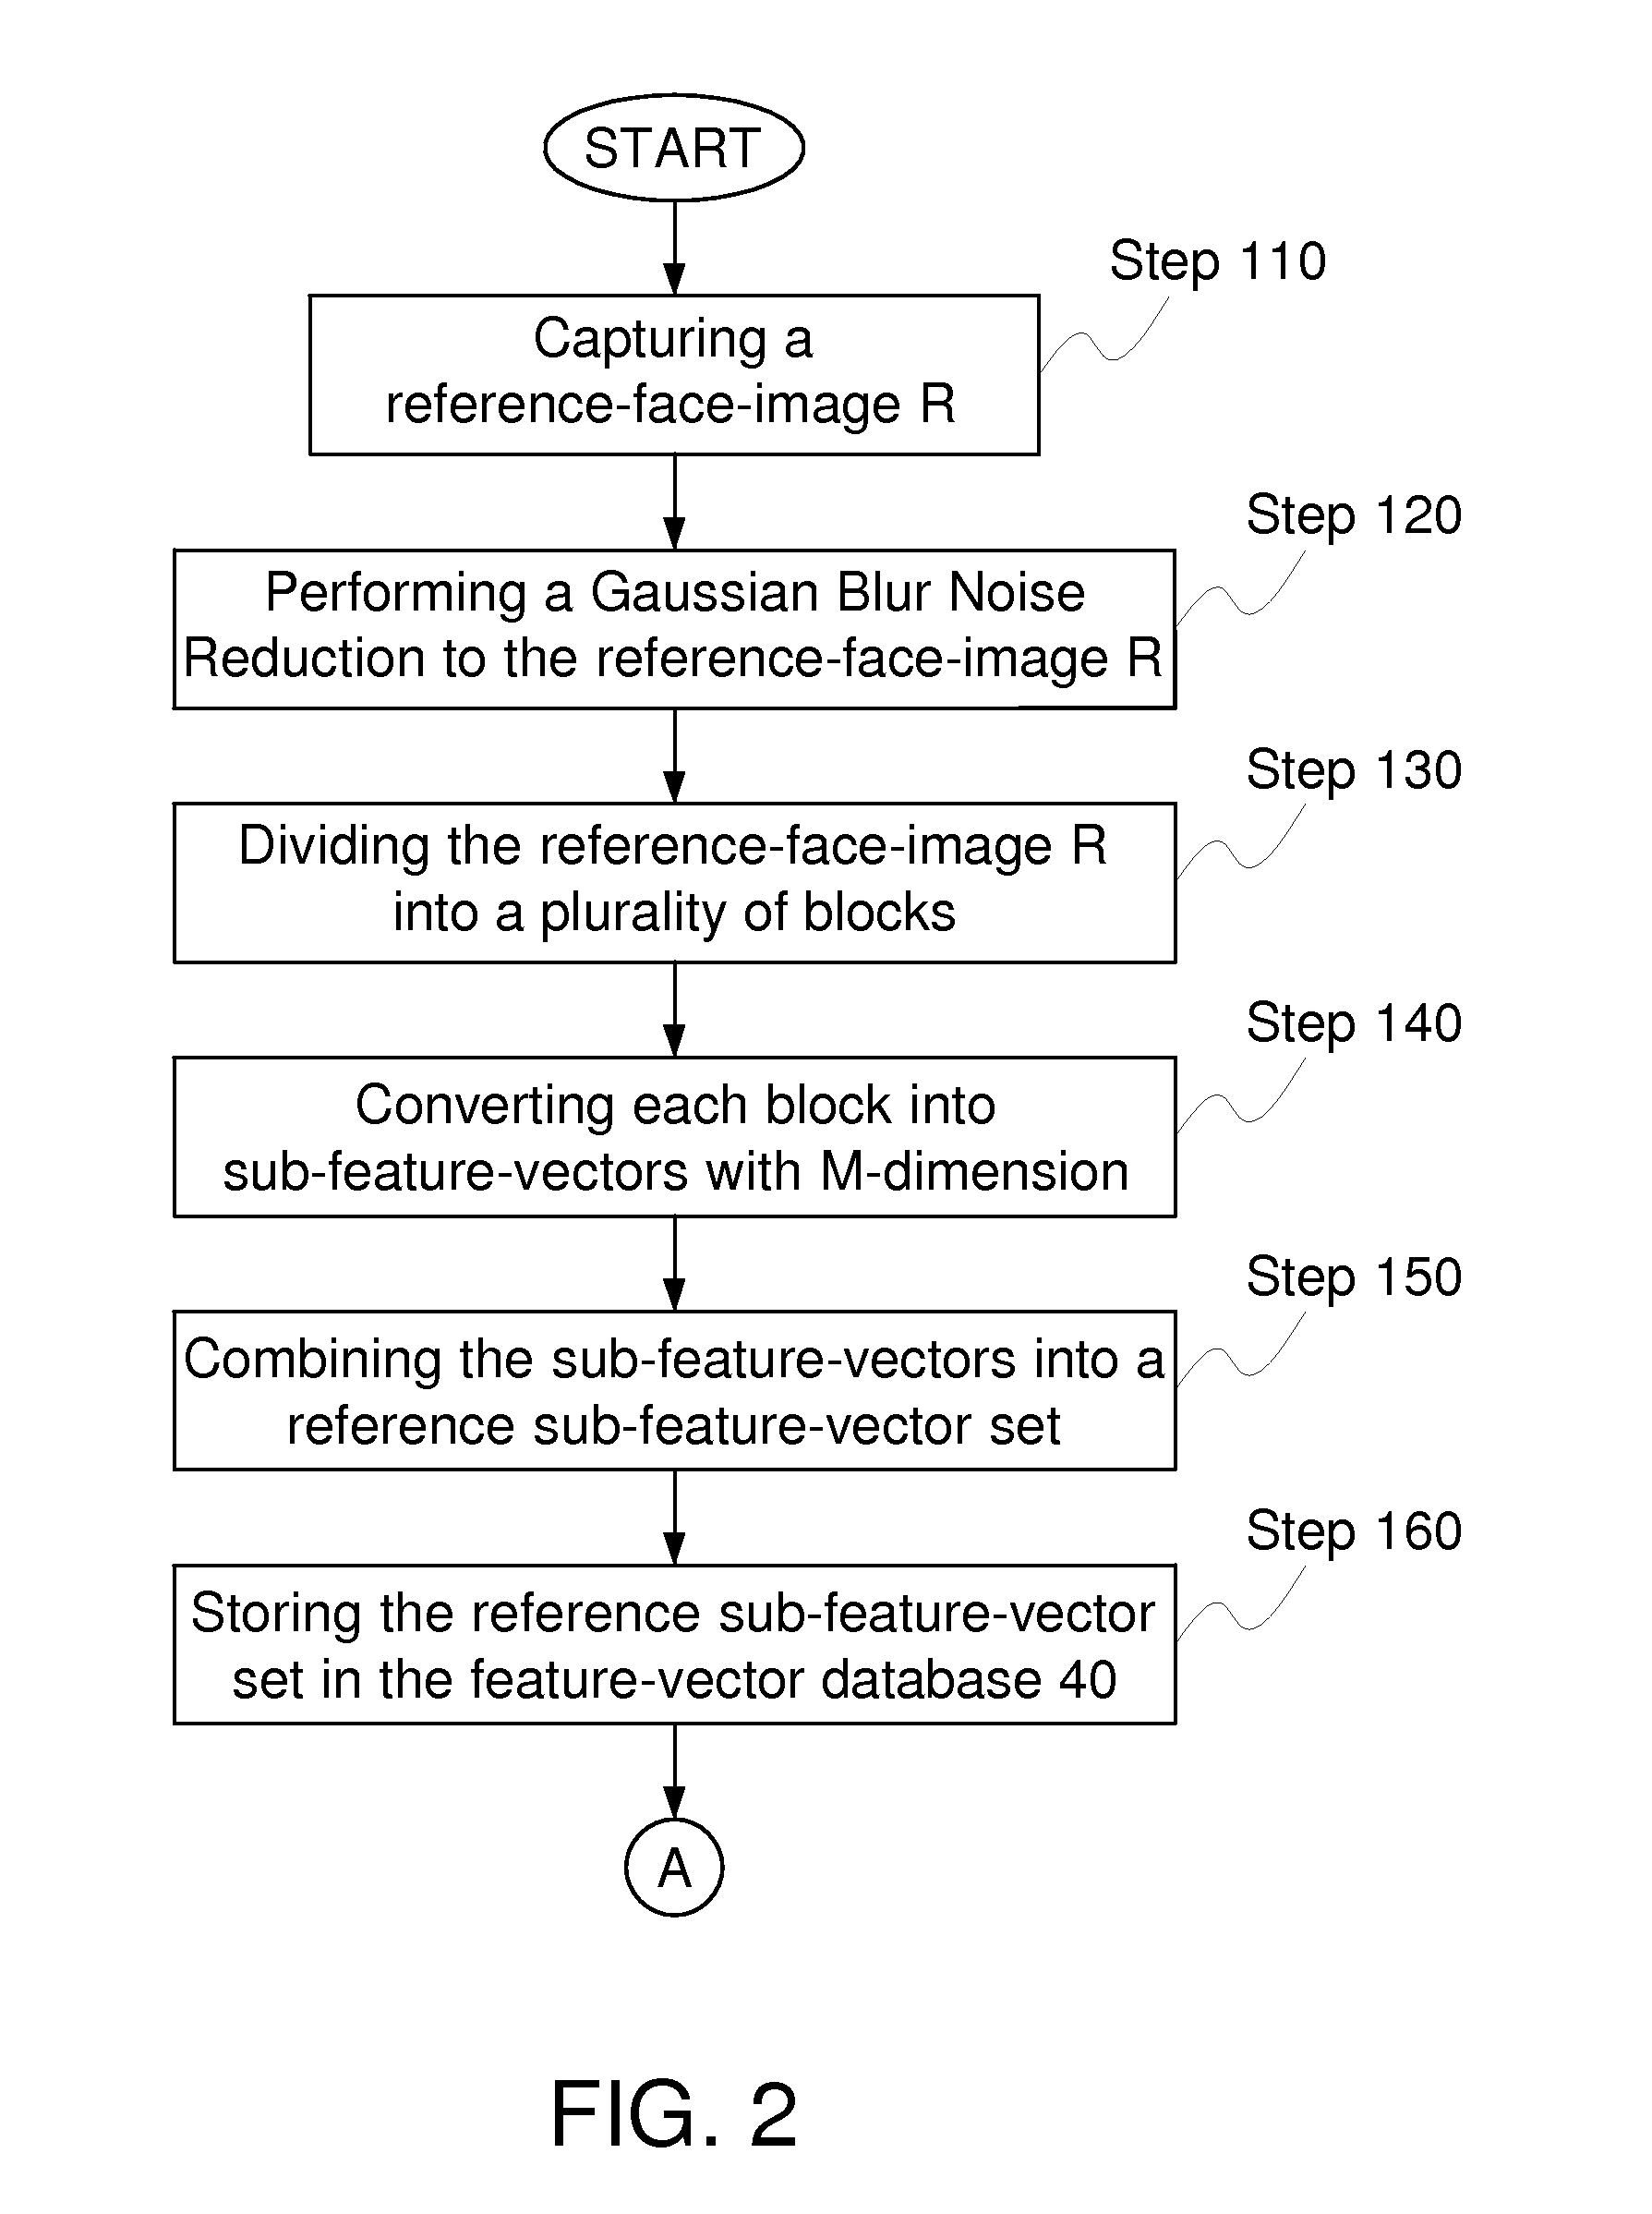 Facial recognition method for eliminating the effect of noise blur and environmental variations